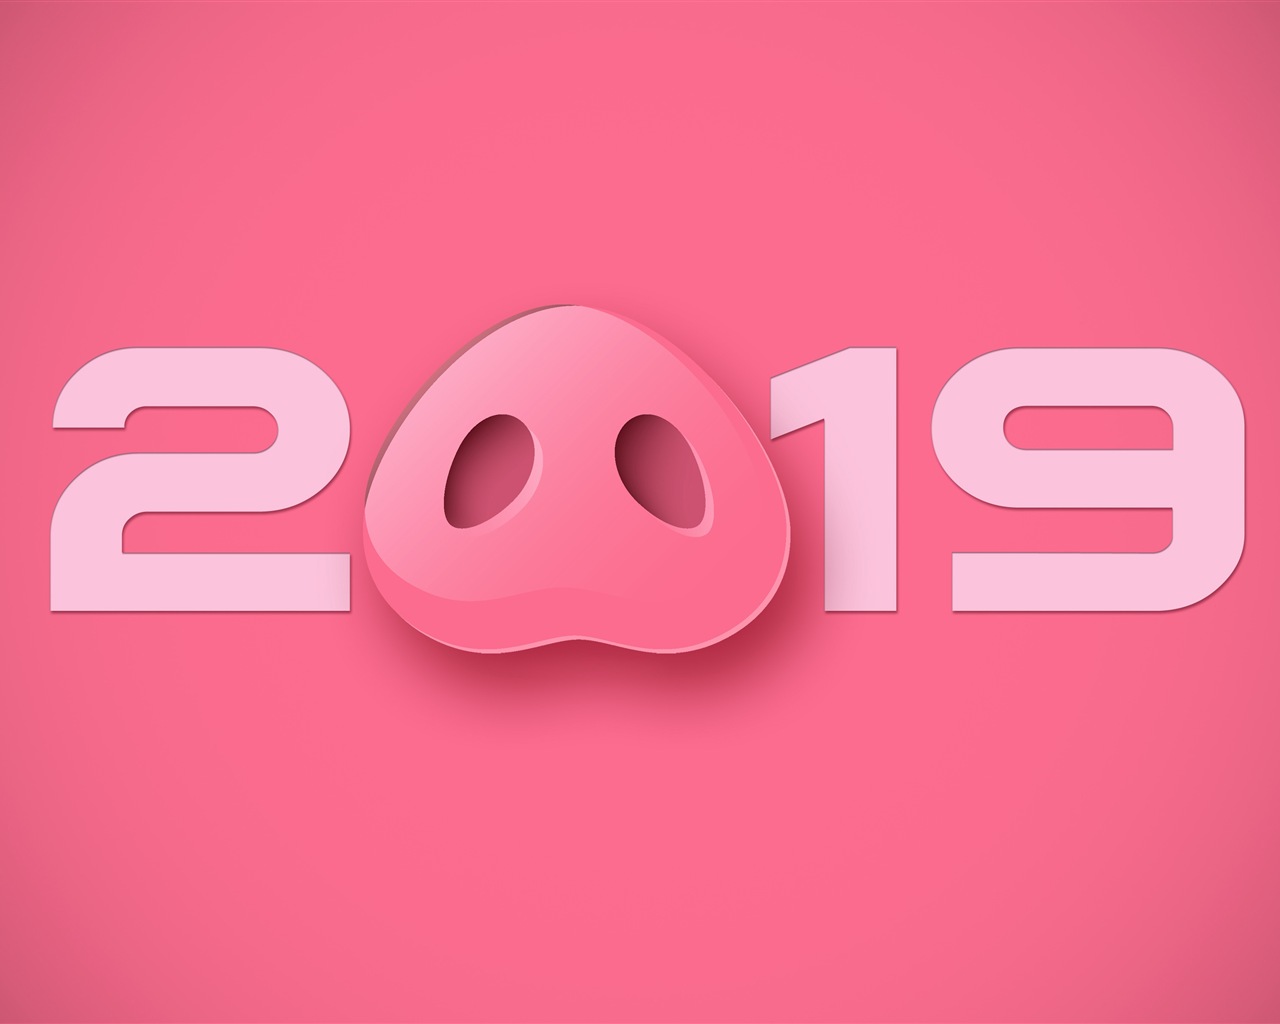 Happy New Year 2019 HD wallpapers #14 - 1280x1024